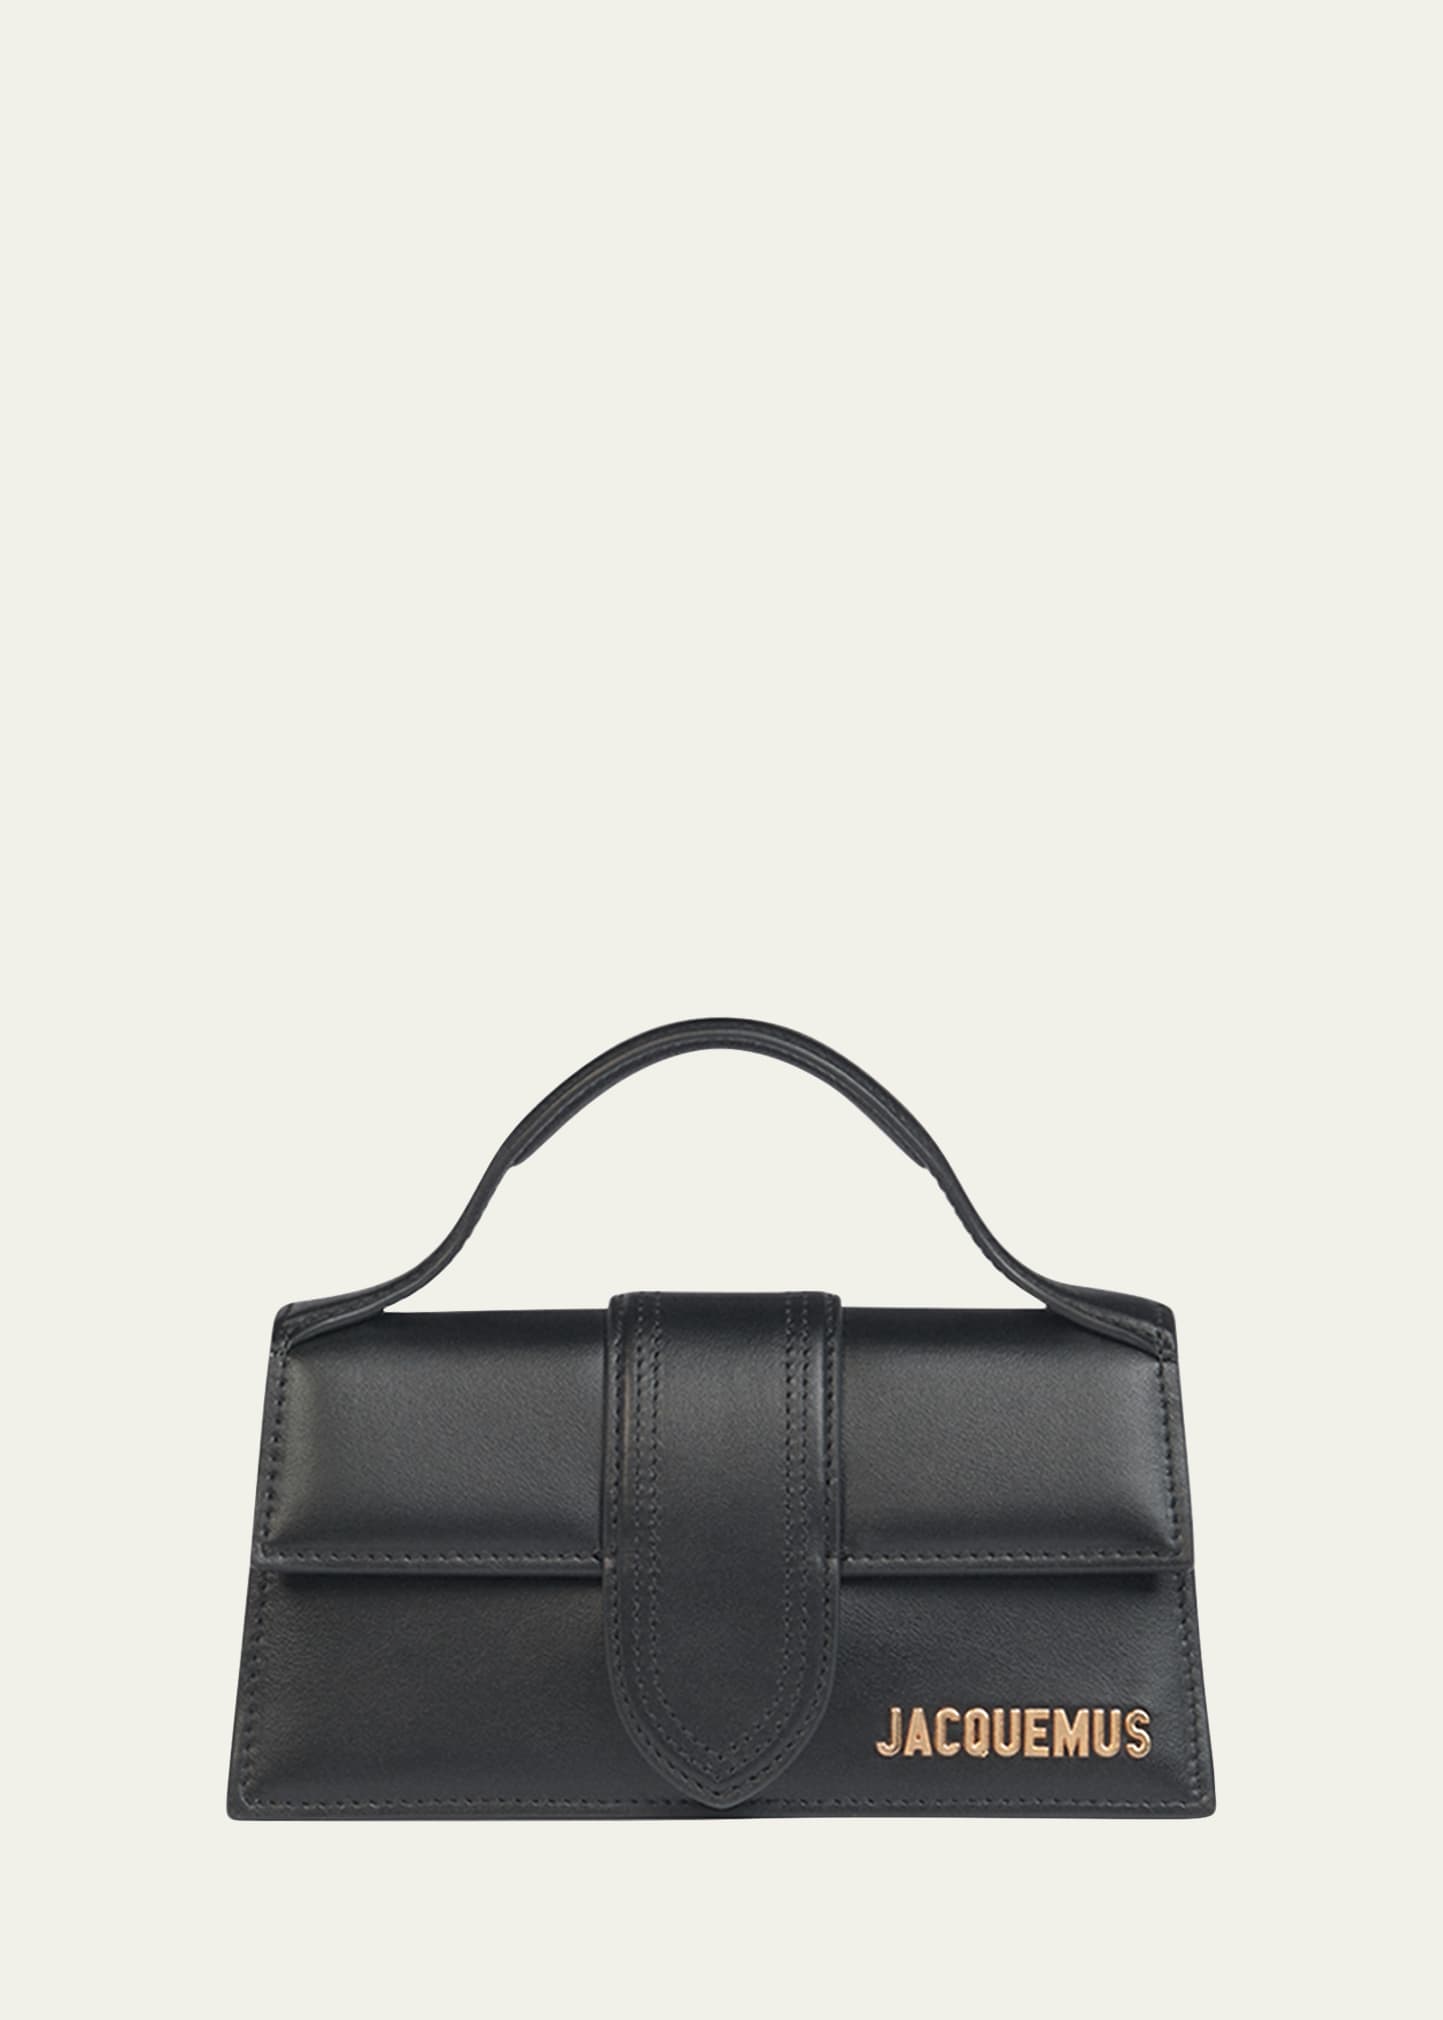 Jacquemus Le Bambino Leather Satchel Bag In Black